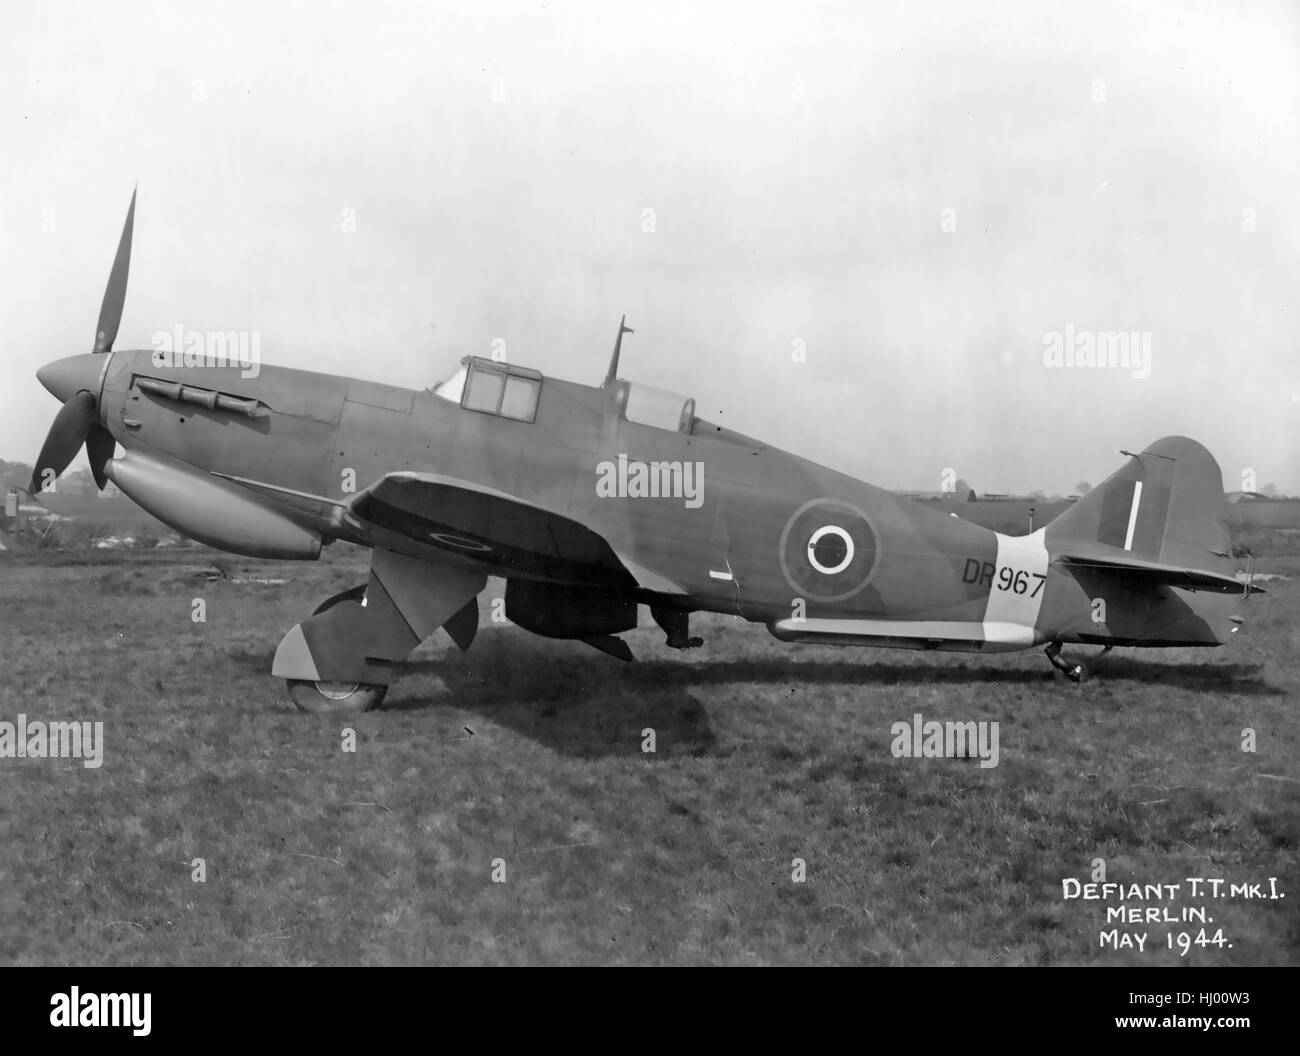 BOULTON PAUL DEFIANT T.T. Mk 1 coded  DR967 with Rolls Royce Merlin engine in May 1944 while used as a target tug.  Air Ministry photo. Stock Photo